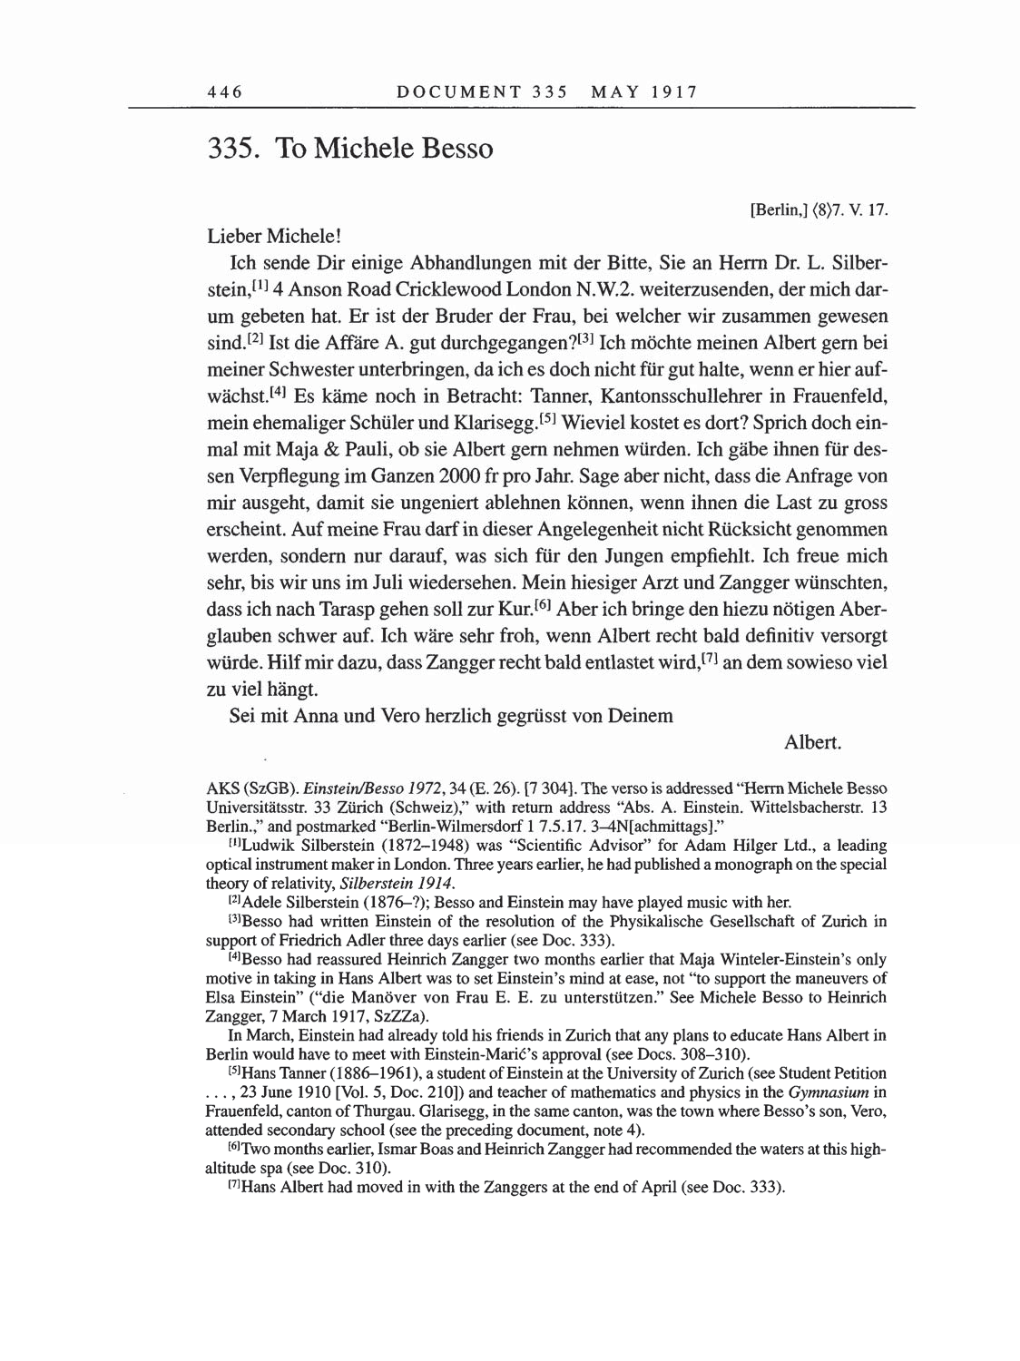 Volume 8, Part A: The Berlin Years: Correspondence 1914-1917 page 446